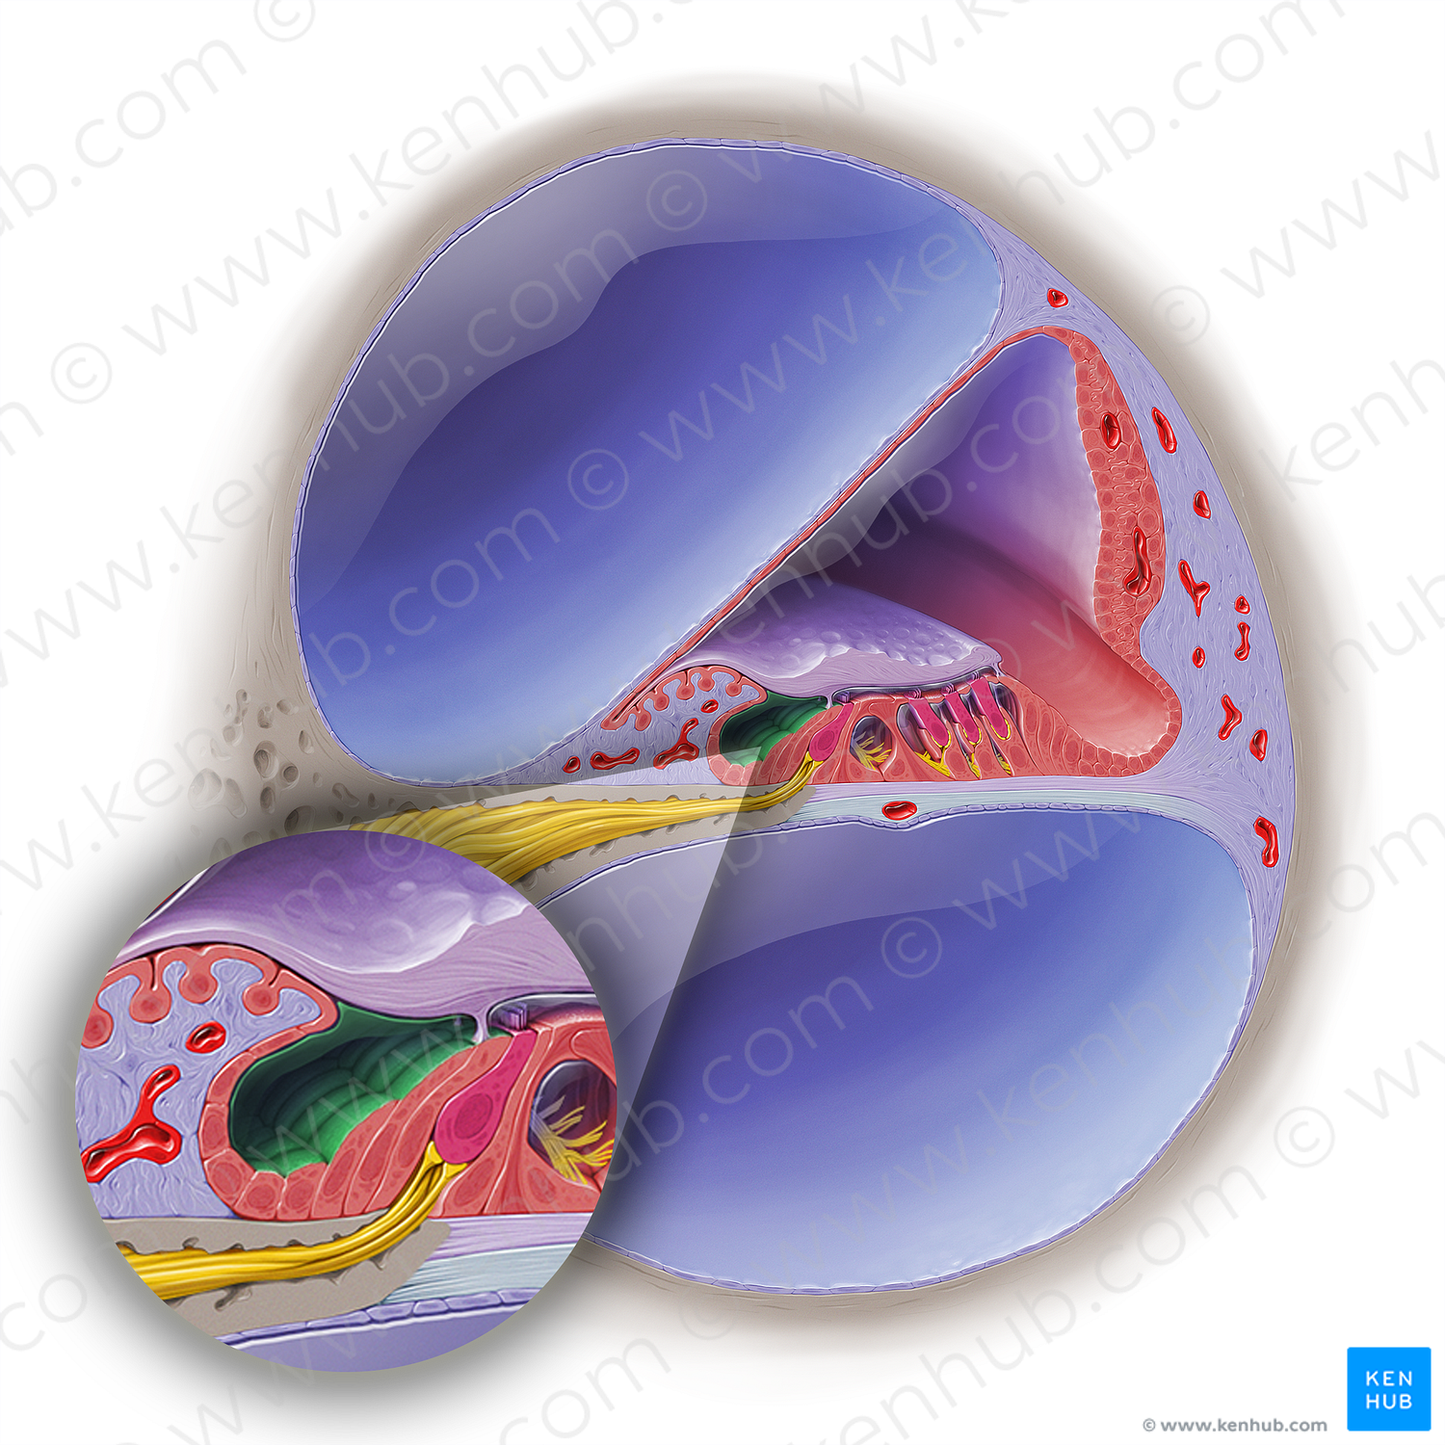 Inner spiral sulcus of cochlear duct (#19031)